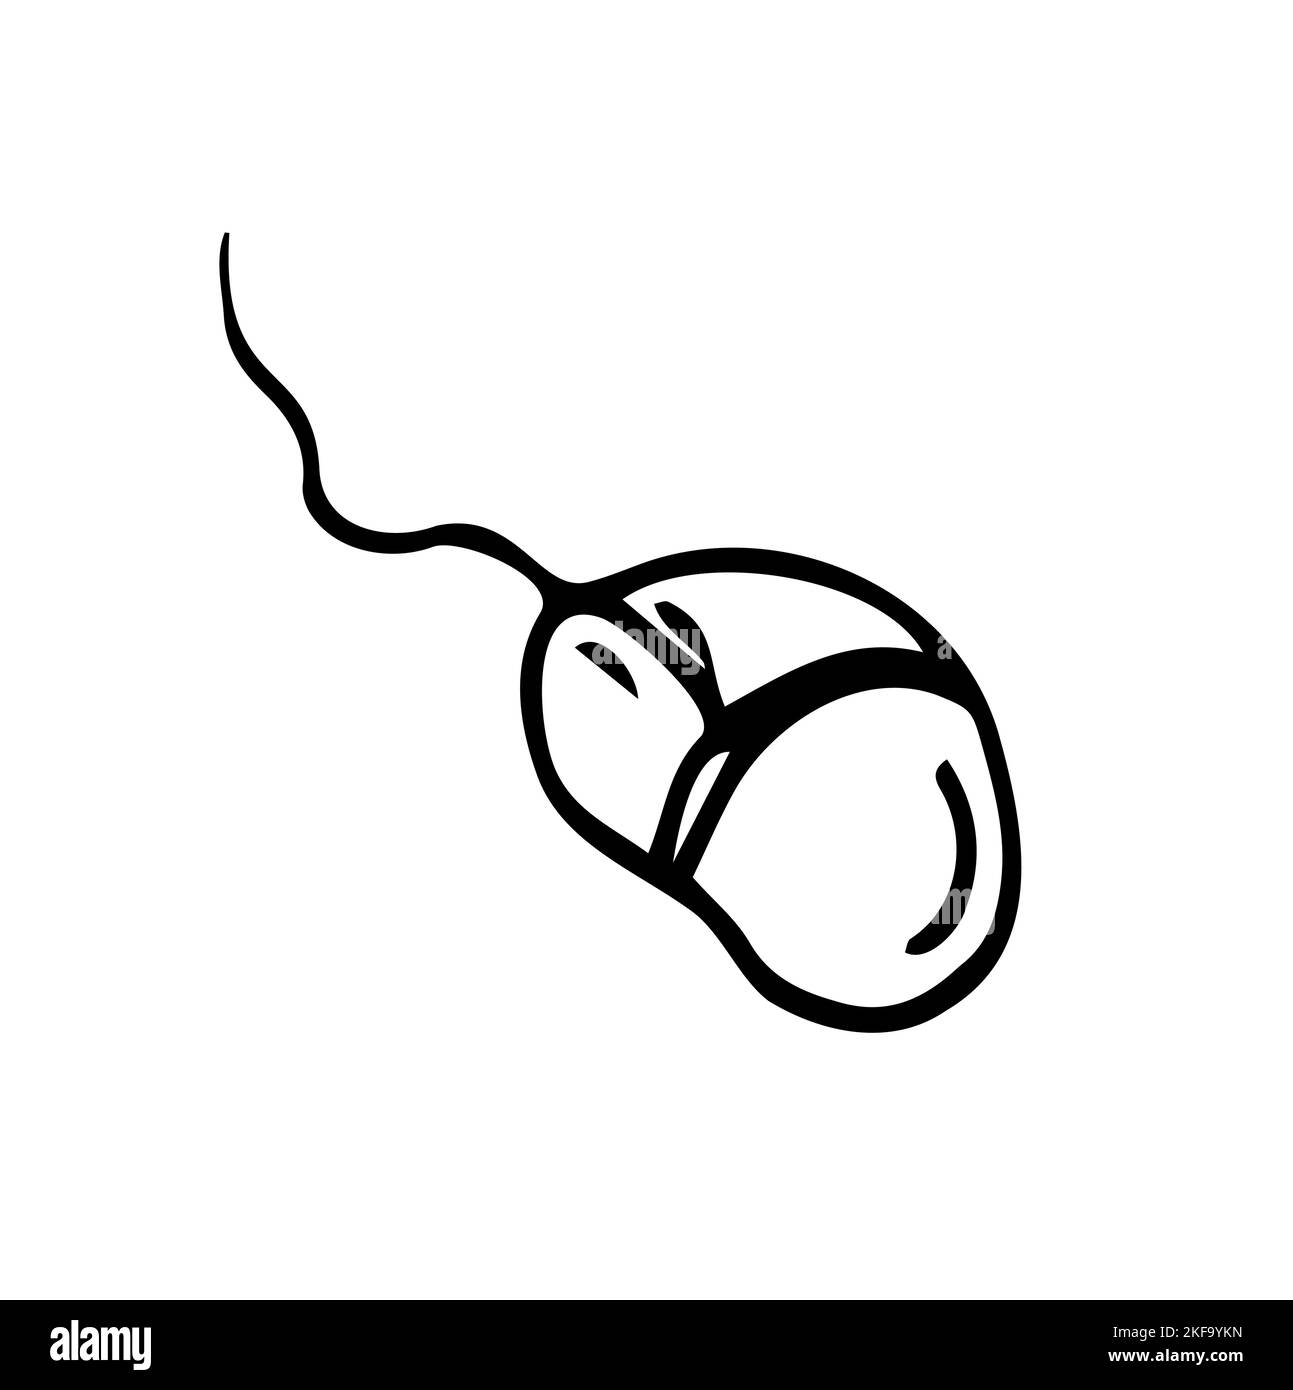 Computer mouse. Coordinate device for cursor control. Wired. Vector illustration in doodle style. Contour on an isolated white background. Sketch. Ill Stock Vector